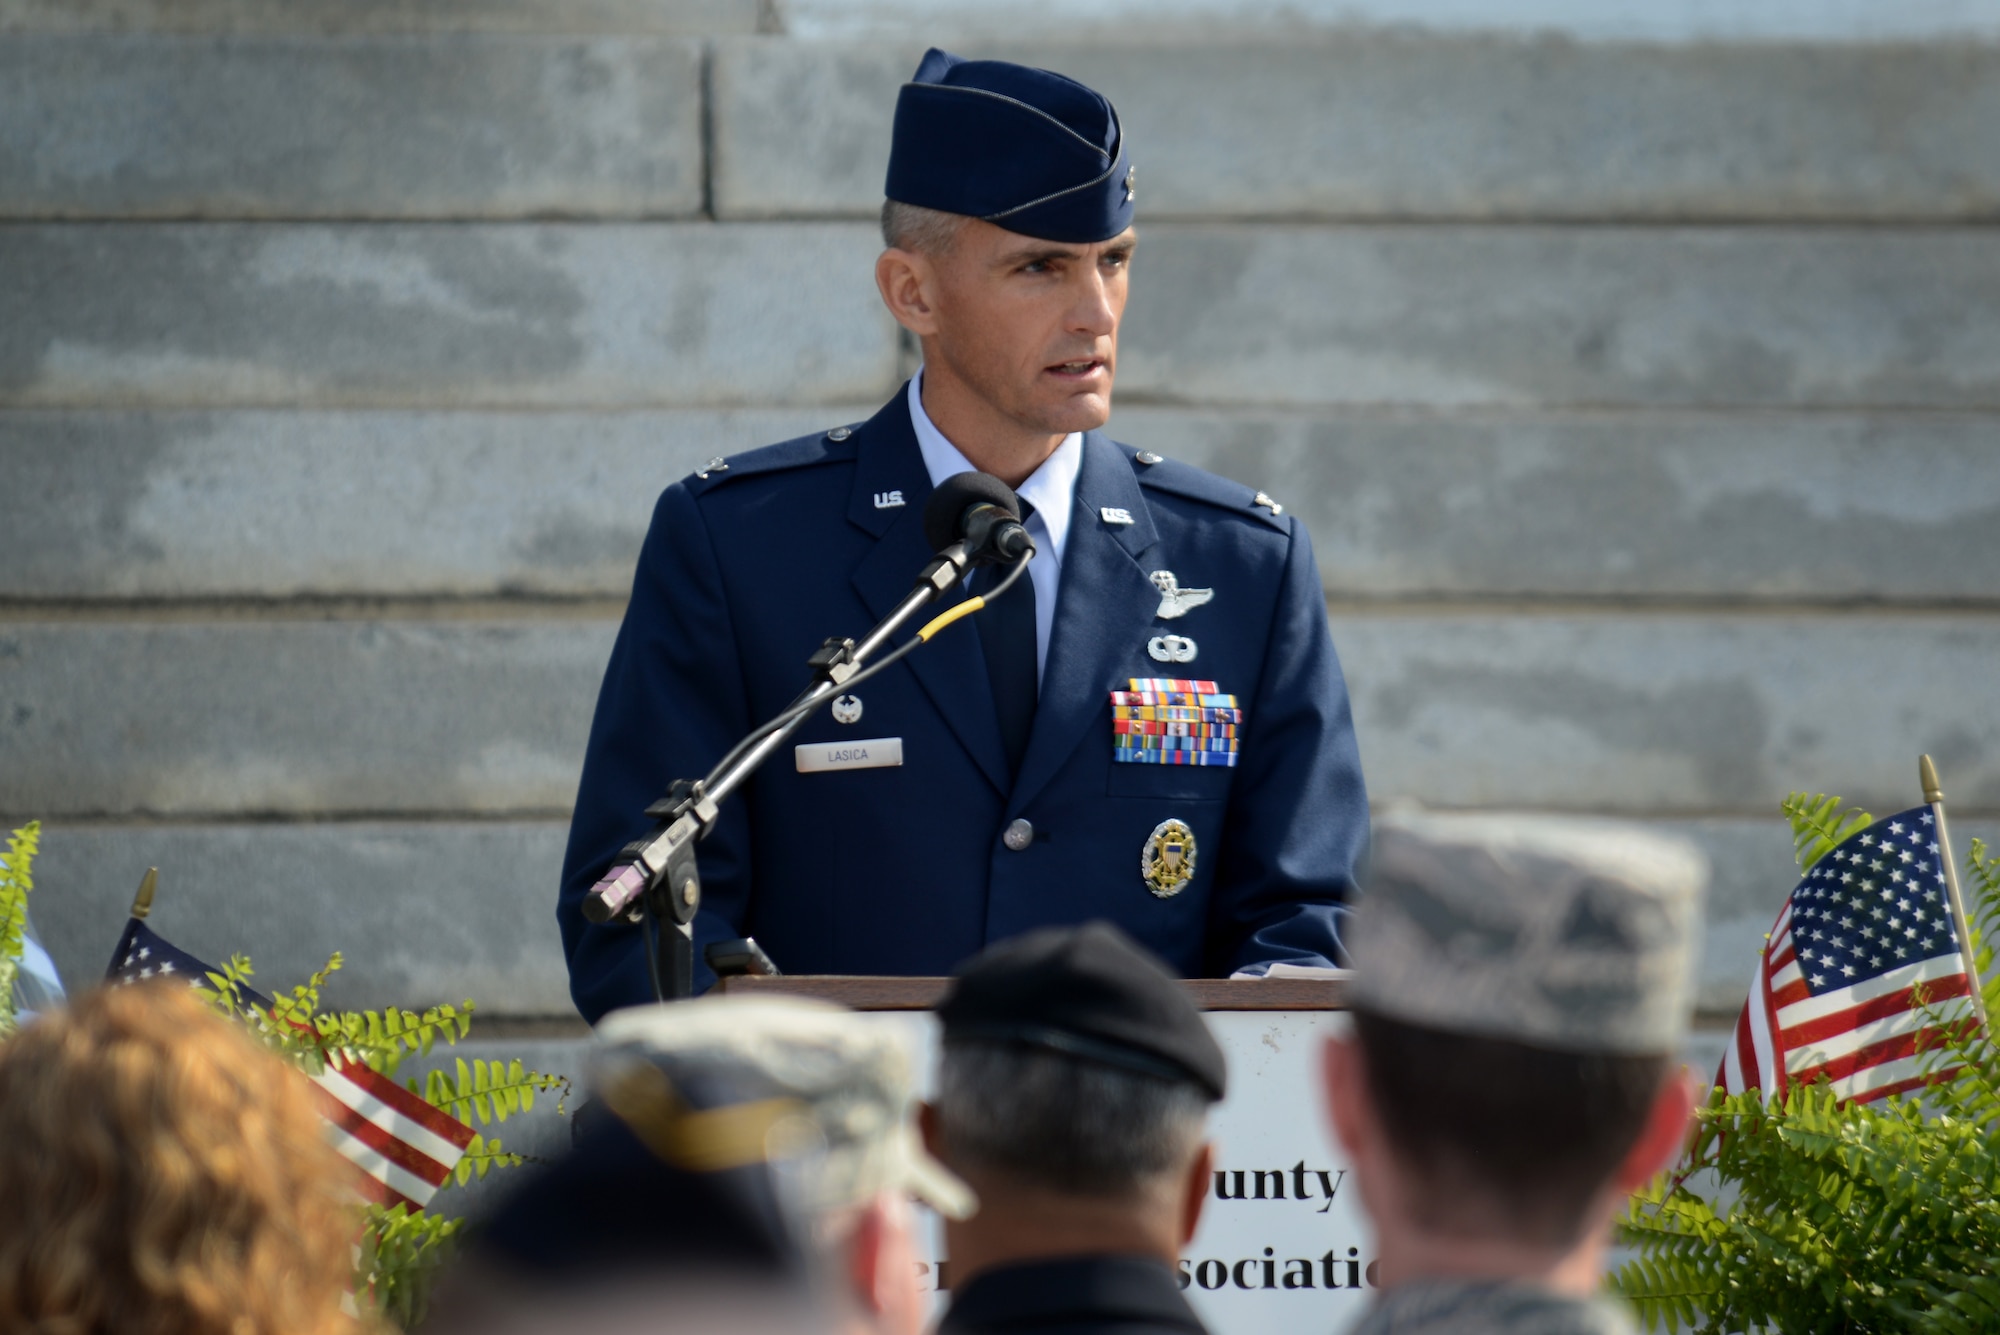 U.S. Air Force Col. Daniel Lasica, 20th Fighter Wing commander, addresses attendees during a Veterans Day ceremony, Sumter, S.C., Nov. 11, 2016. Lasica was the guest speaker for the ceremony held on the front lawn of the Sumter County Courthouse. (U.S. Air Force photo by Airman 1st Class Kelsey Tucker)